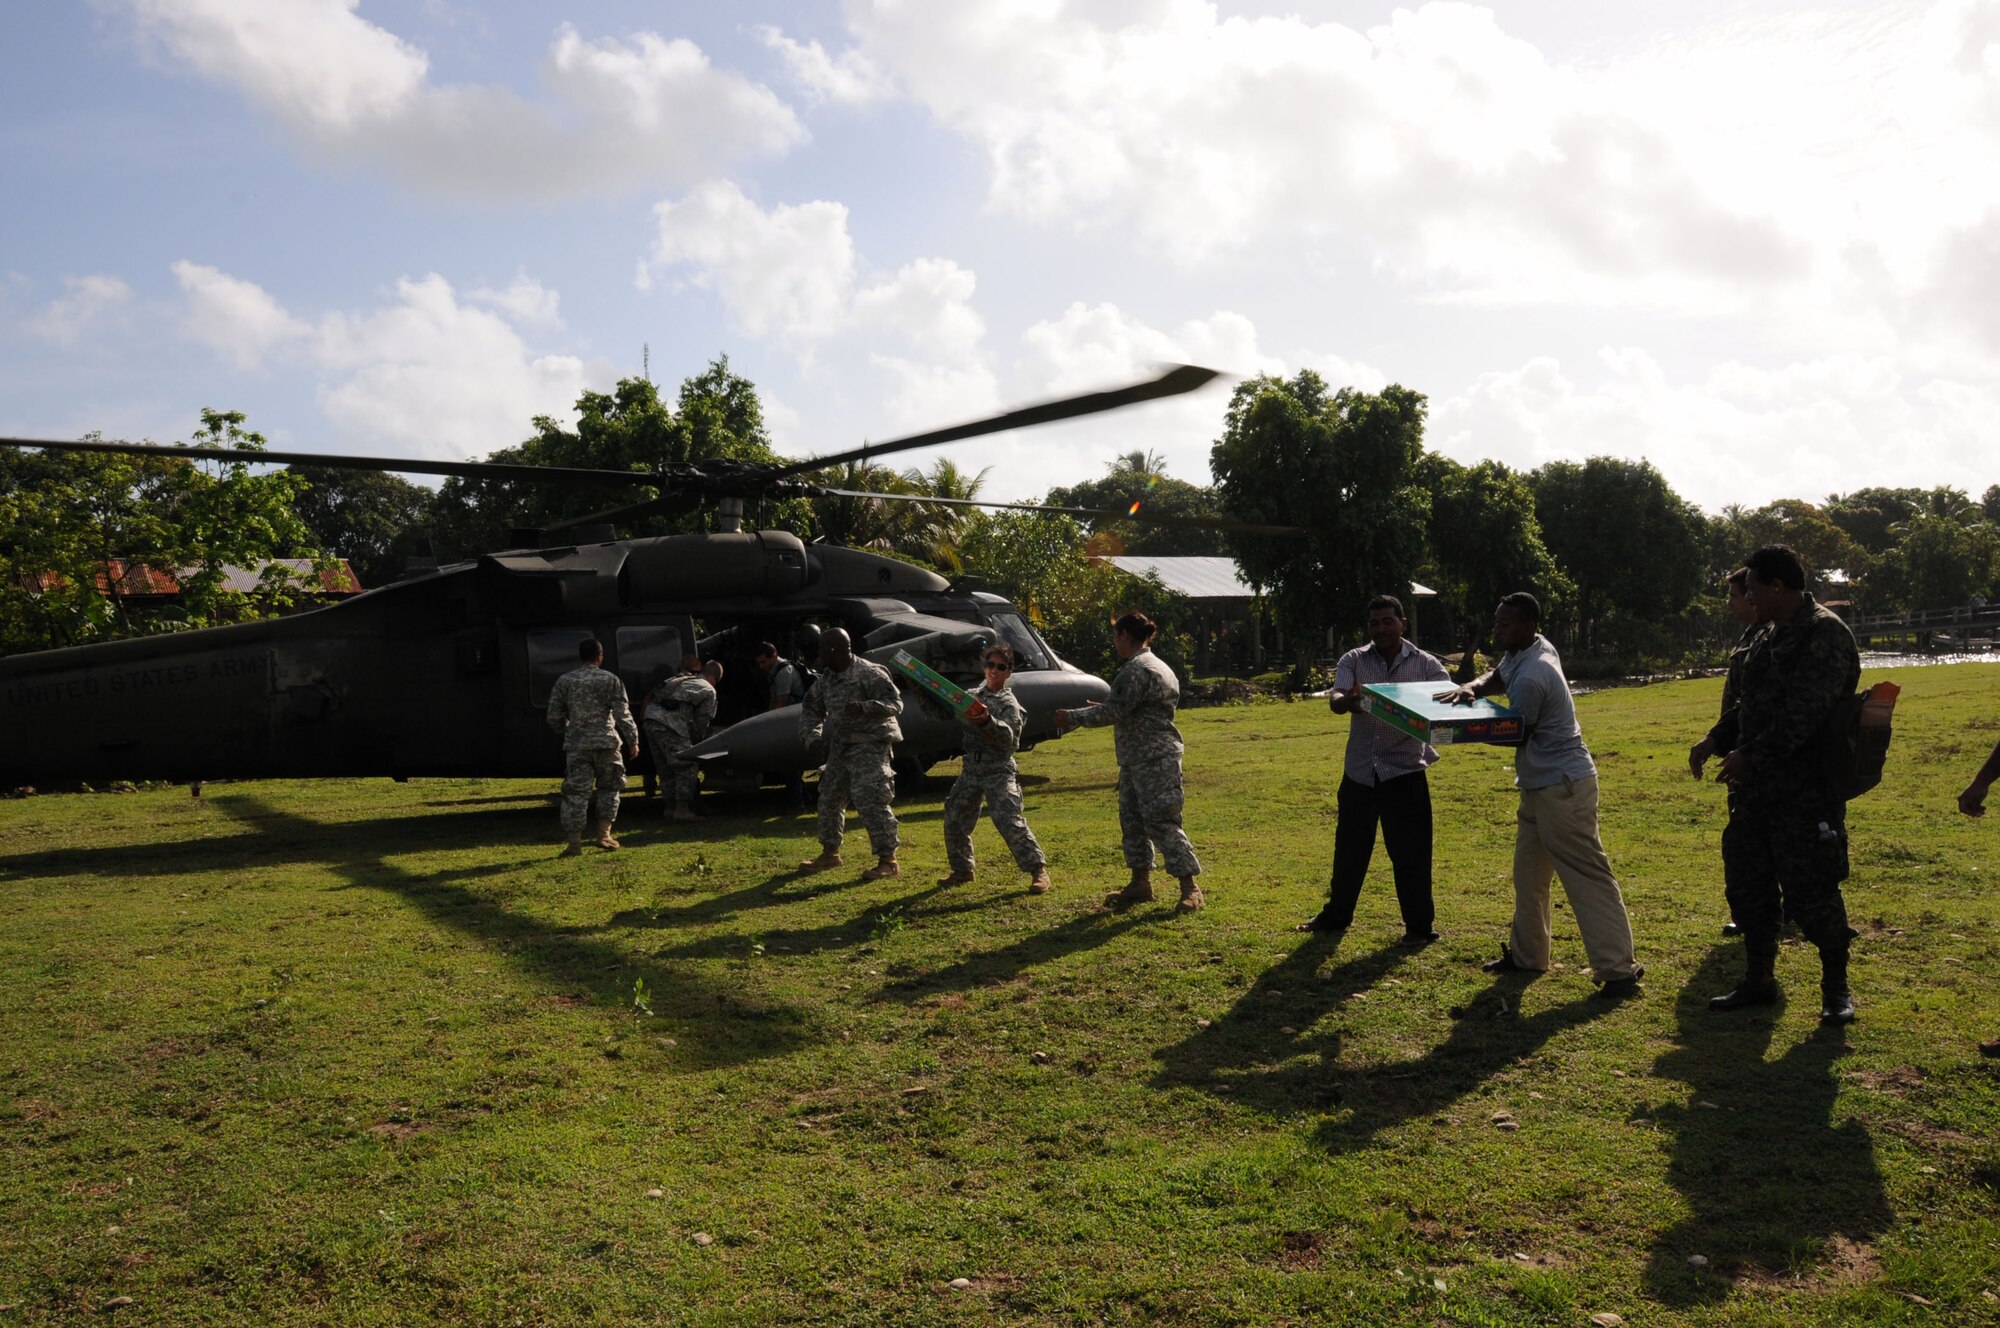 Members of Joint Task Force-Bravo, Honduras military and villagers from Barra Patuca,unload supplies from a UH-60 Black Hawk for a MEDRETE exercise.  Joint Task Force -Bravo's Medical Element (MEDEL), with support from 1-228th Aviation Regiment, JTF-Bravo Joint Security Forces and Army Forces Battalion, partnered with the Honduras Ministry of Health and the Honduran military to provide medical care to more than 650 people in the remote village of Barra Patuca in the Department of Gracias a Dios, Honduras, during a Medical Readiness Training Exercise (MEDRETE), July 17, 2014.  The multi-national team worked together to provide preventative medicine to the villagers, including classes on hygiene, preventative dental care, and nutrition. They also provided immunizations to infants, dental care, wellness checkups, medications, and minor medical procedures.  (Photo by U. S. Air National Guard Capt. Steven Stubbs)